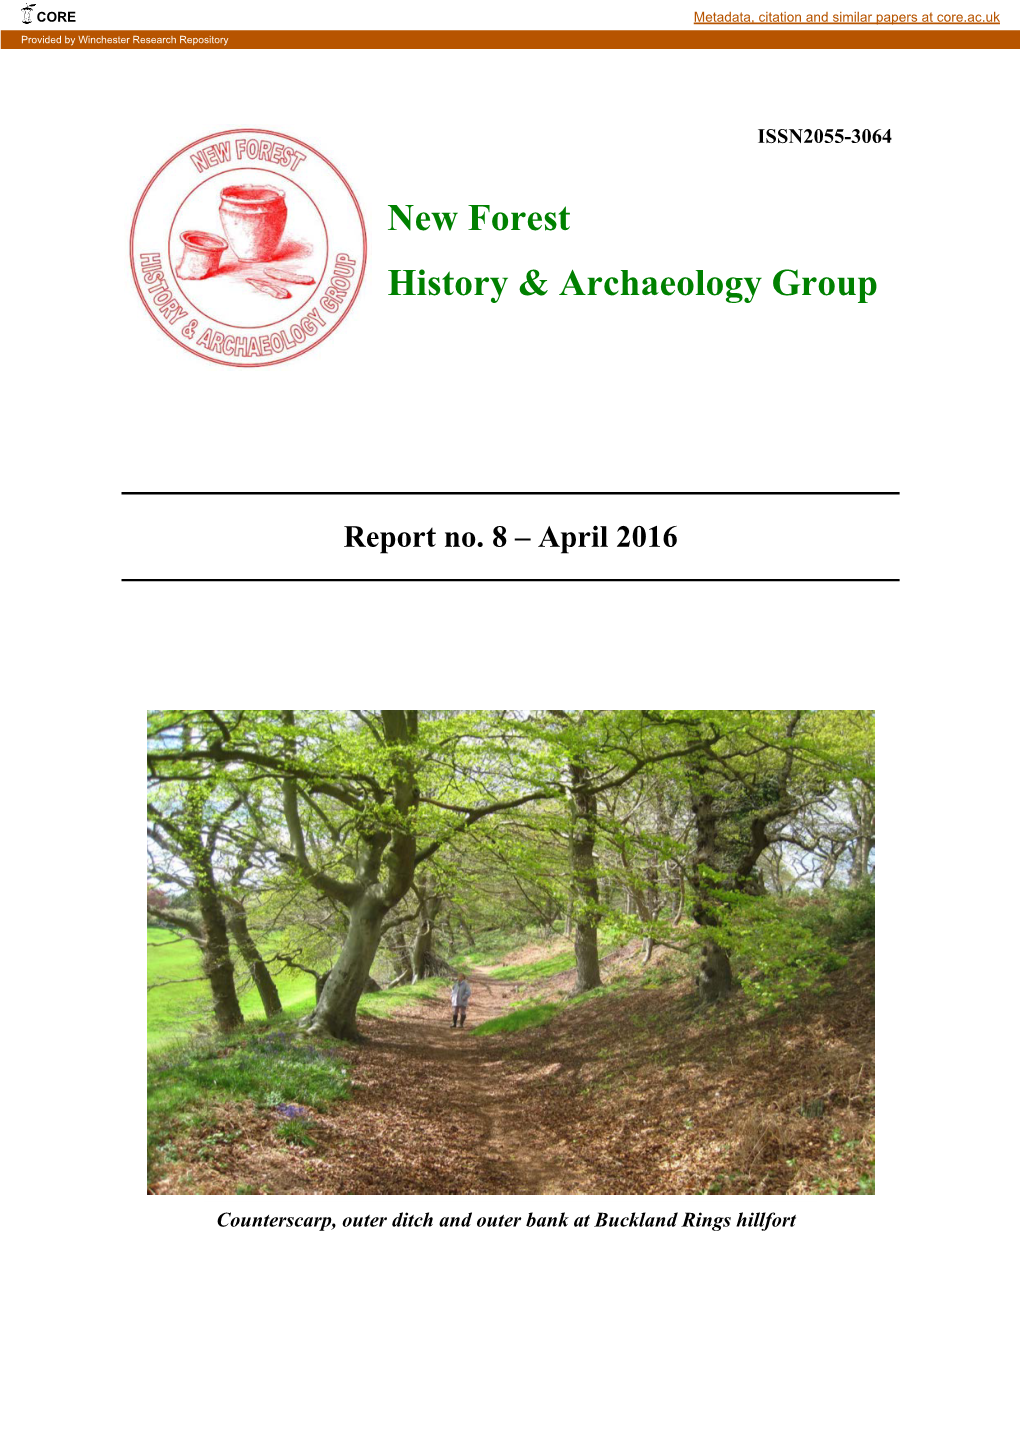 New Forest History & Archaeology Group